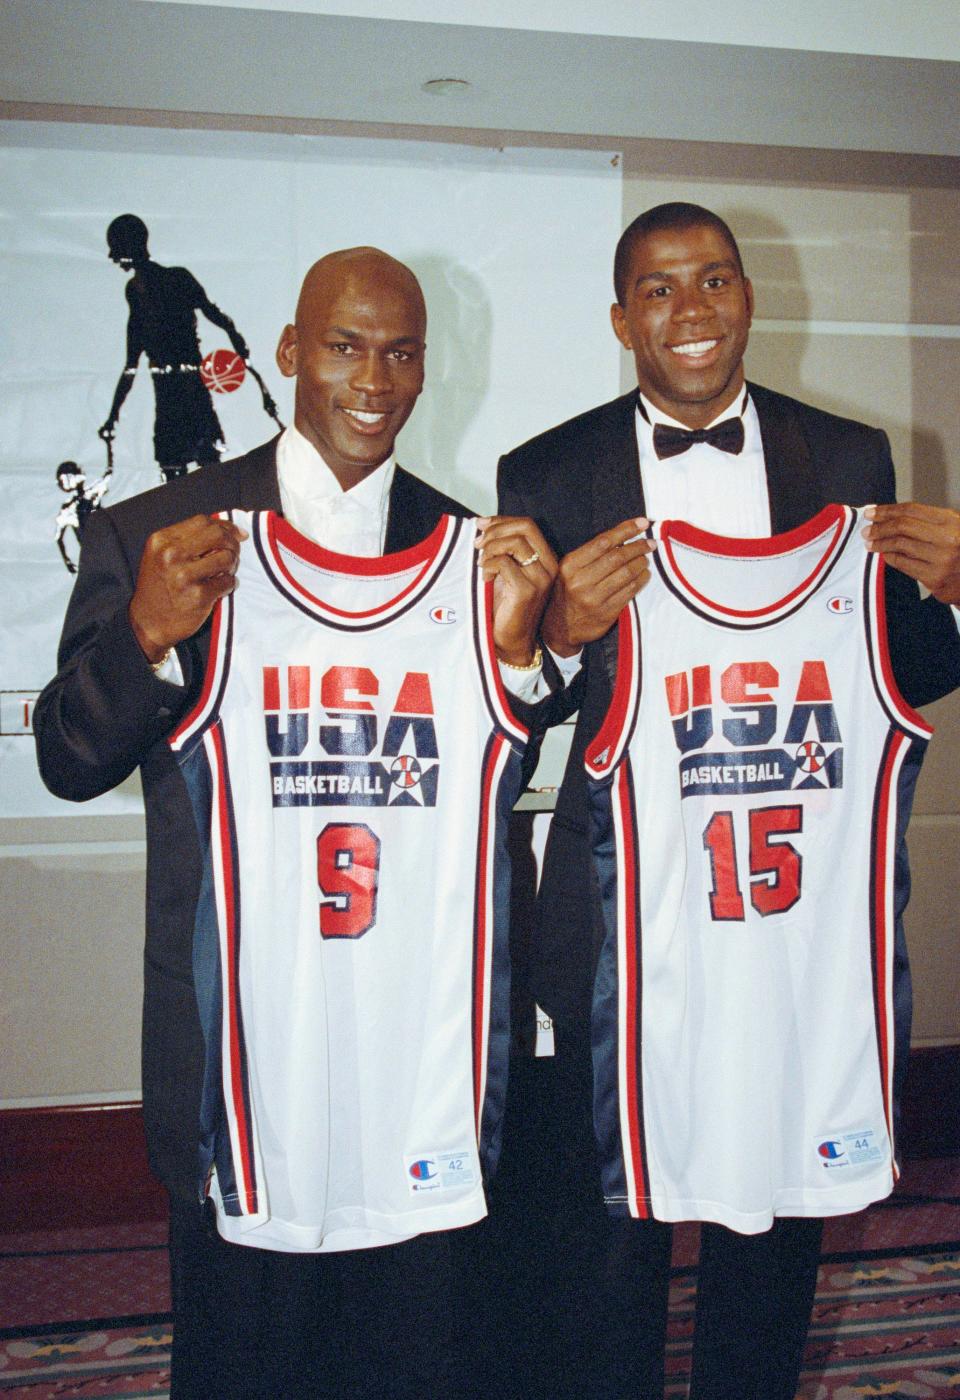 Michael Jordan, left, and Magic Johnson hold up their uniforms for the 1992 US Olympic basketball team.